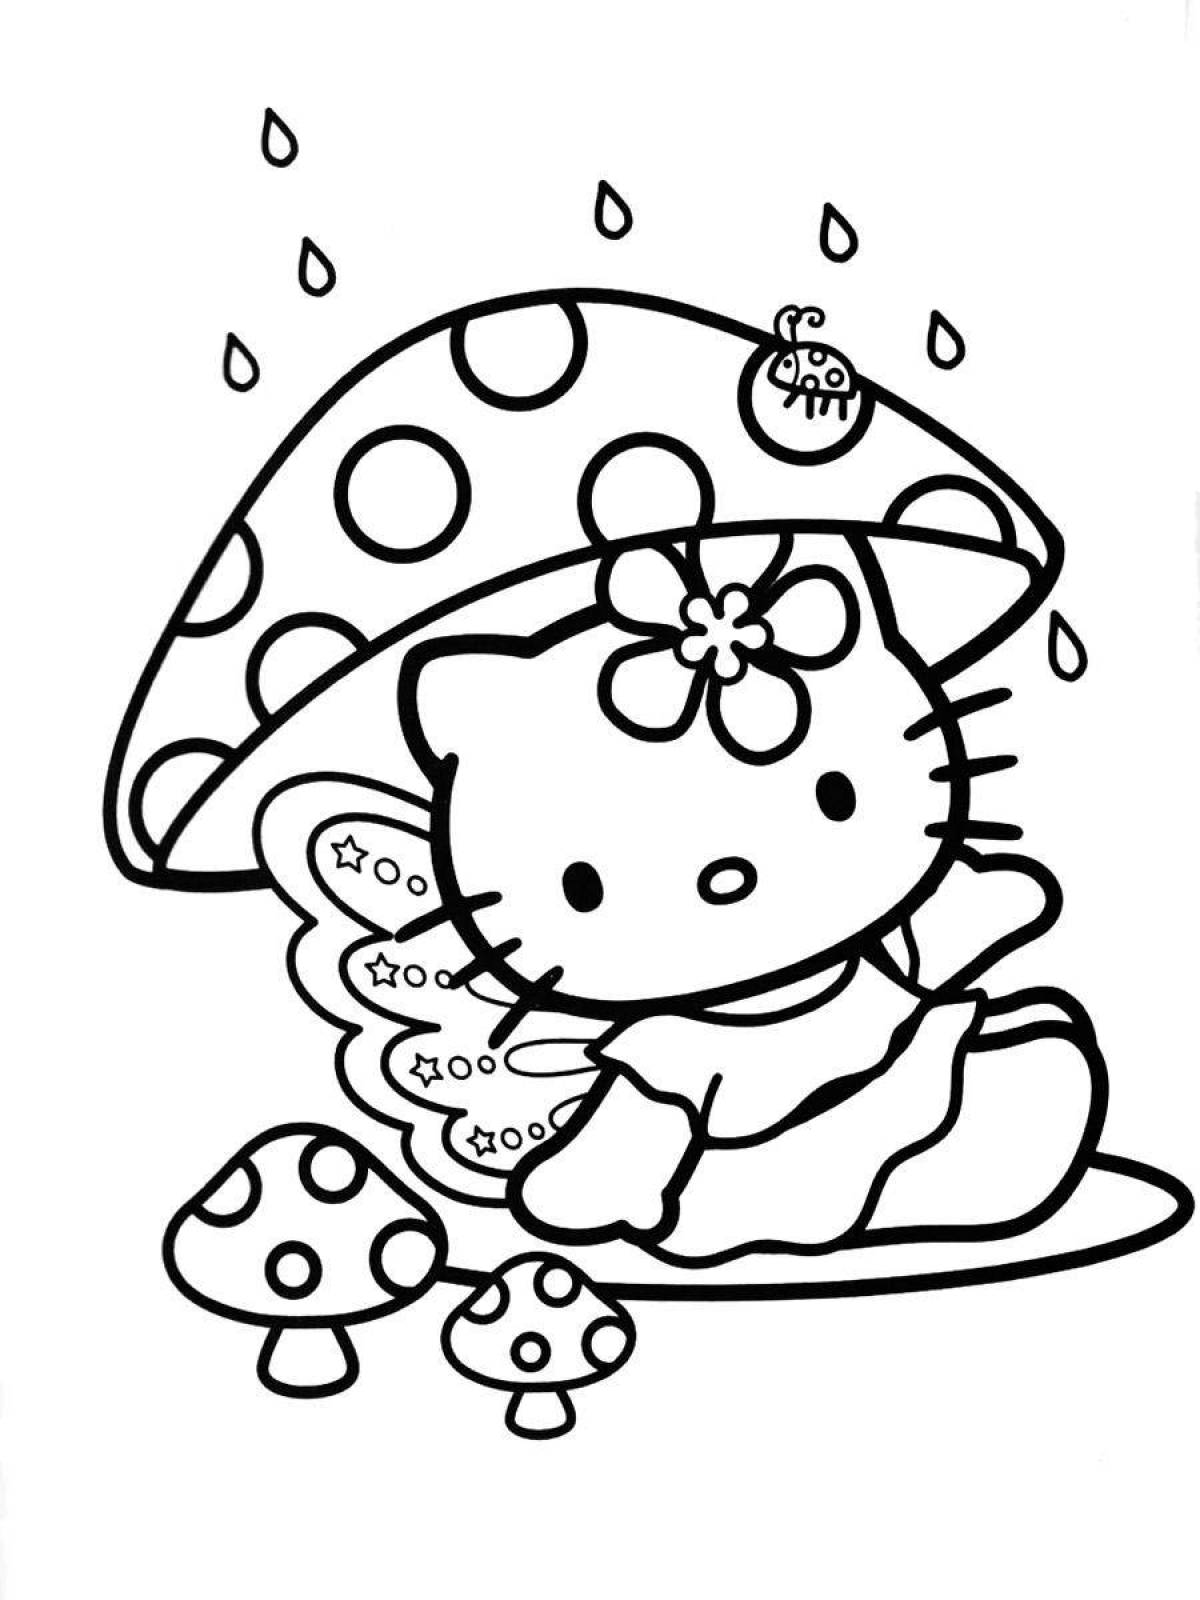 Fancy chicken hello kitty coloring book